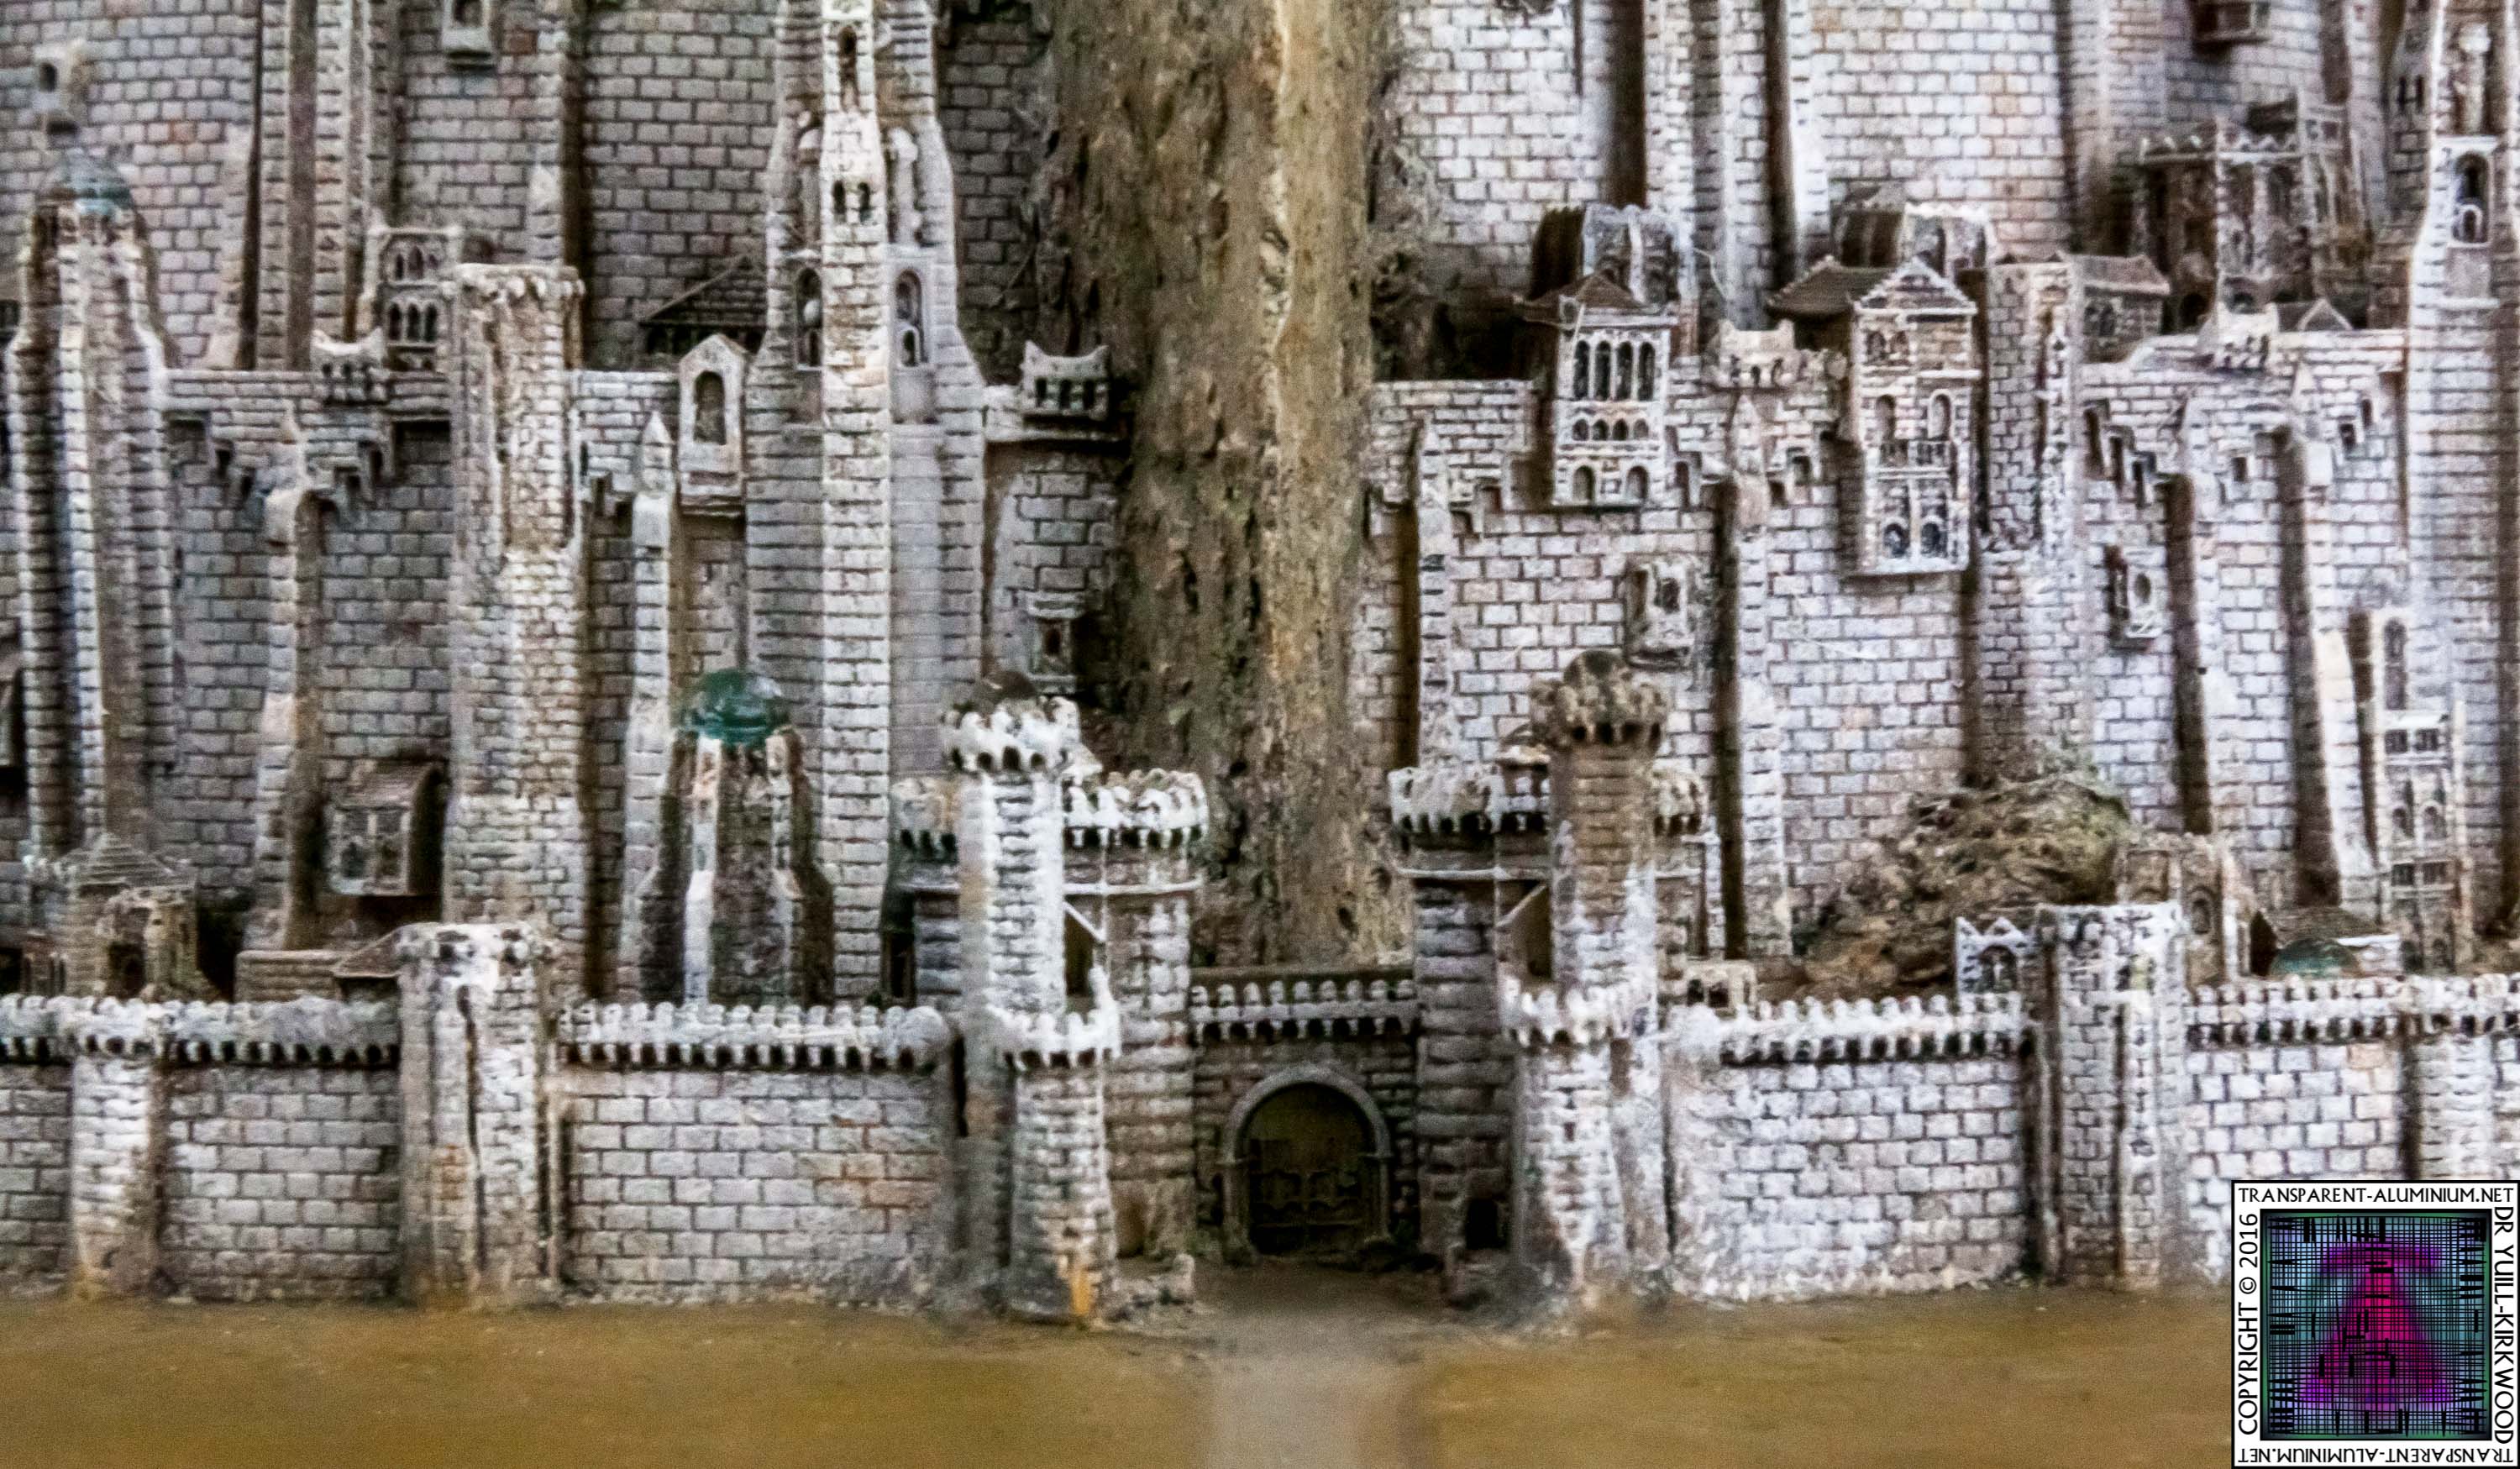 Greg's Cool [Insert Clever Name] of the Day: Minas Tirith, Aerial